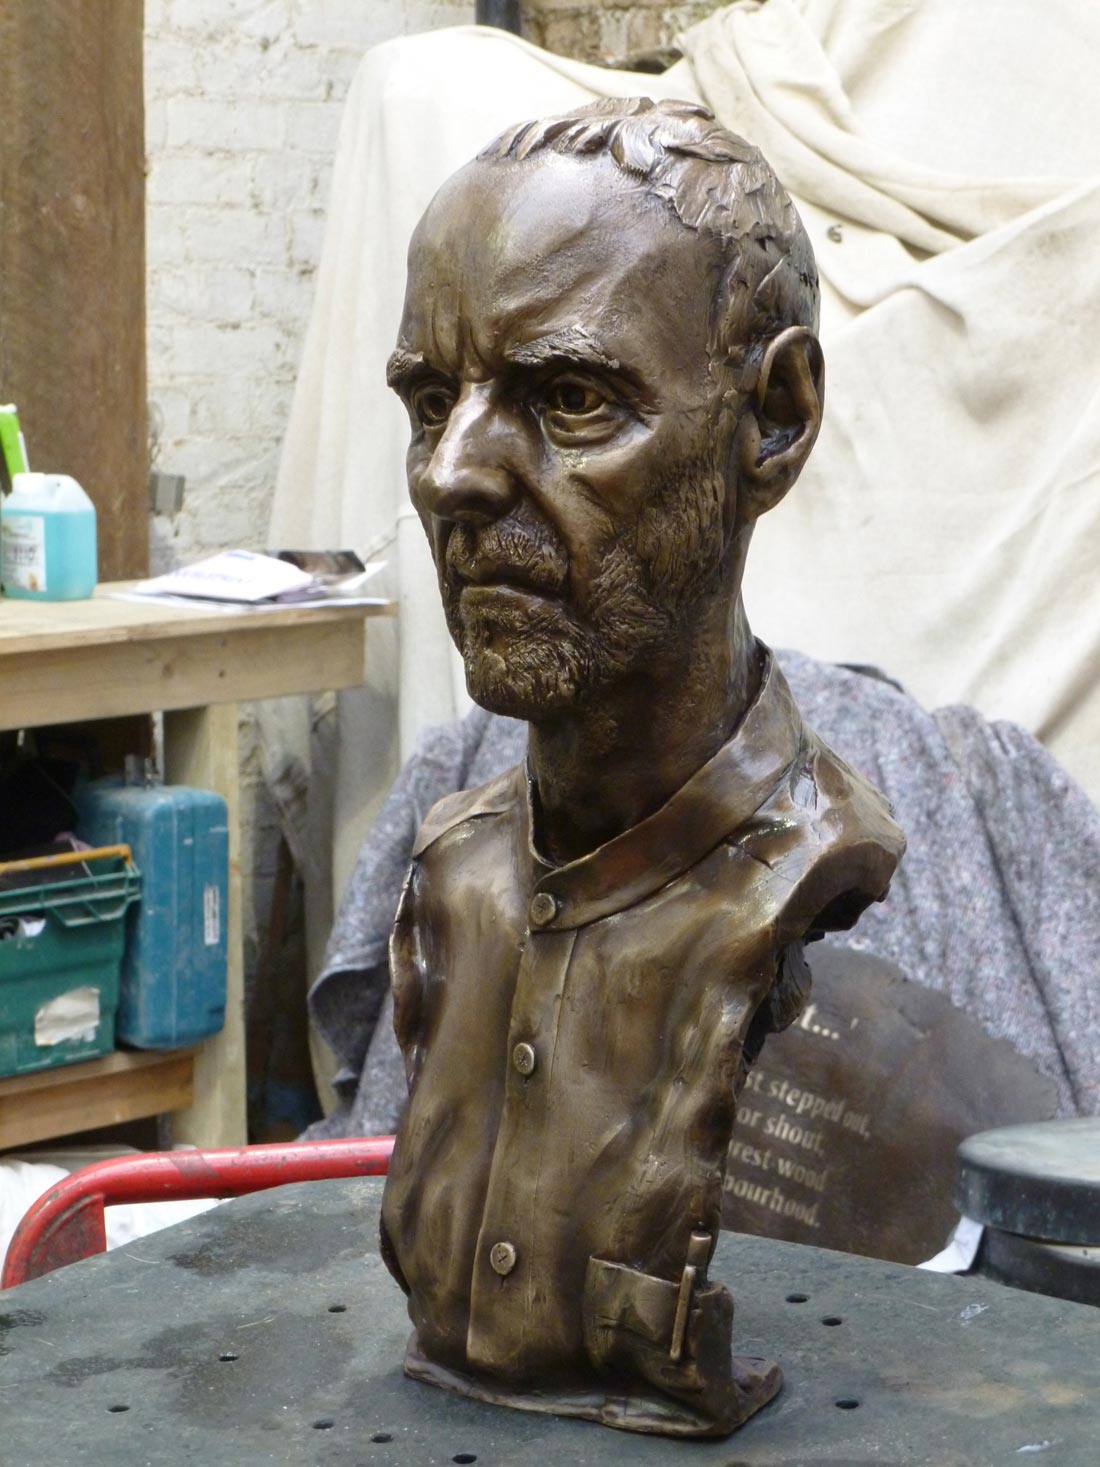 Geoff, the finished bronze 